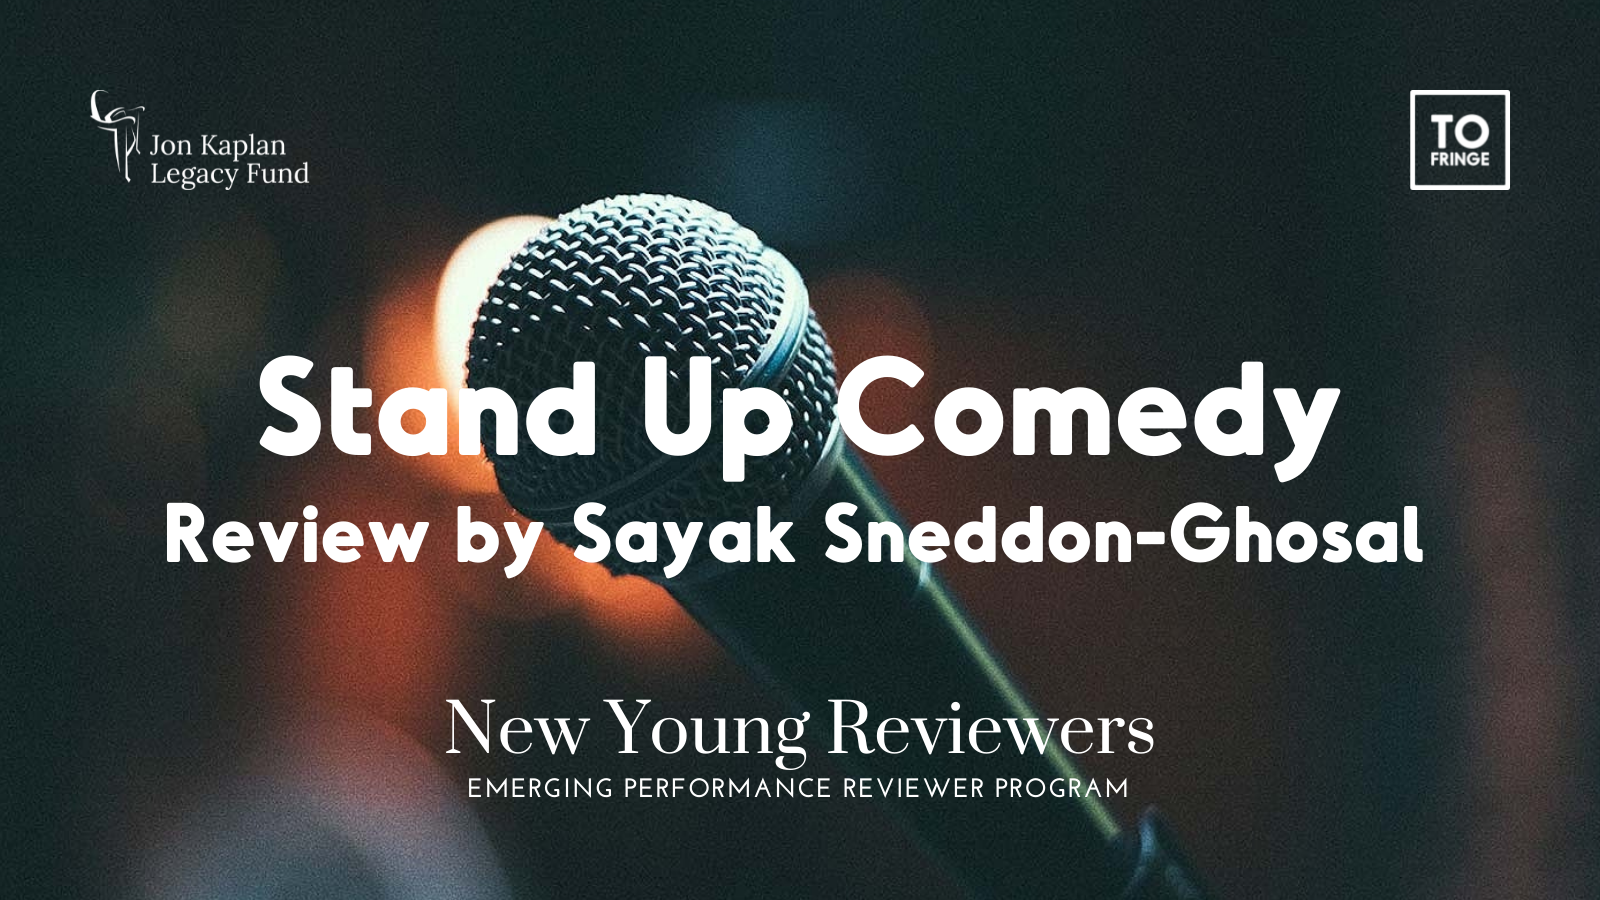 A close up photo of a microphone with a blurred background that reads “Stand Up Comedy. Review by Sayak Sneddon-Ghosal.” with program logos.